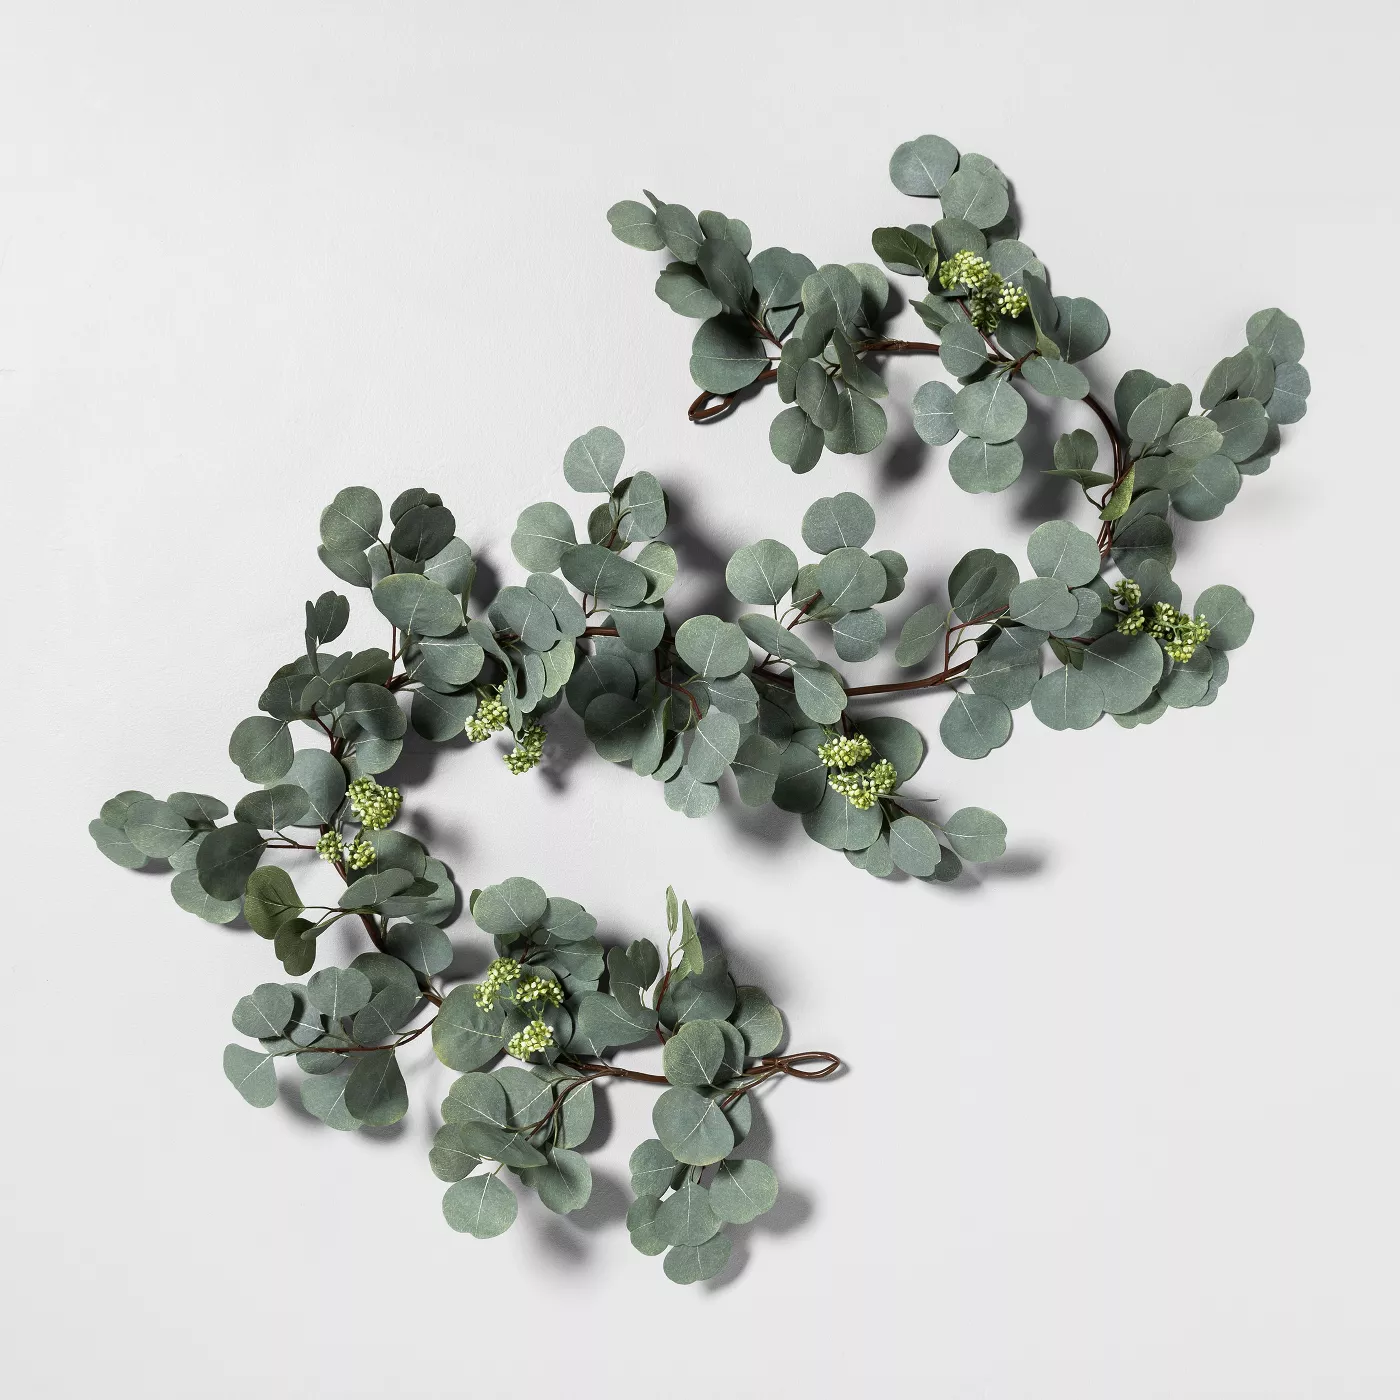 72" Faux Garland Eucalyptus with Seeds - Hearth & Hand™ with Magnolia - image 1 of 2